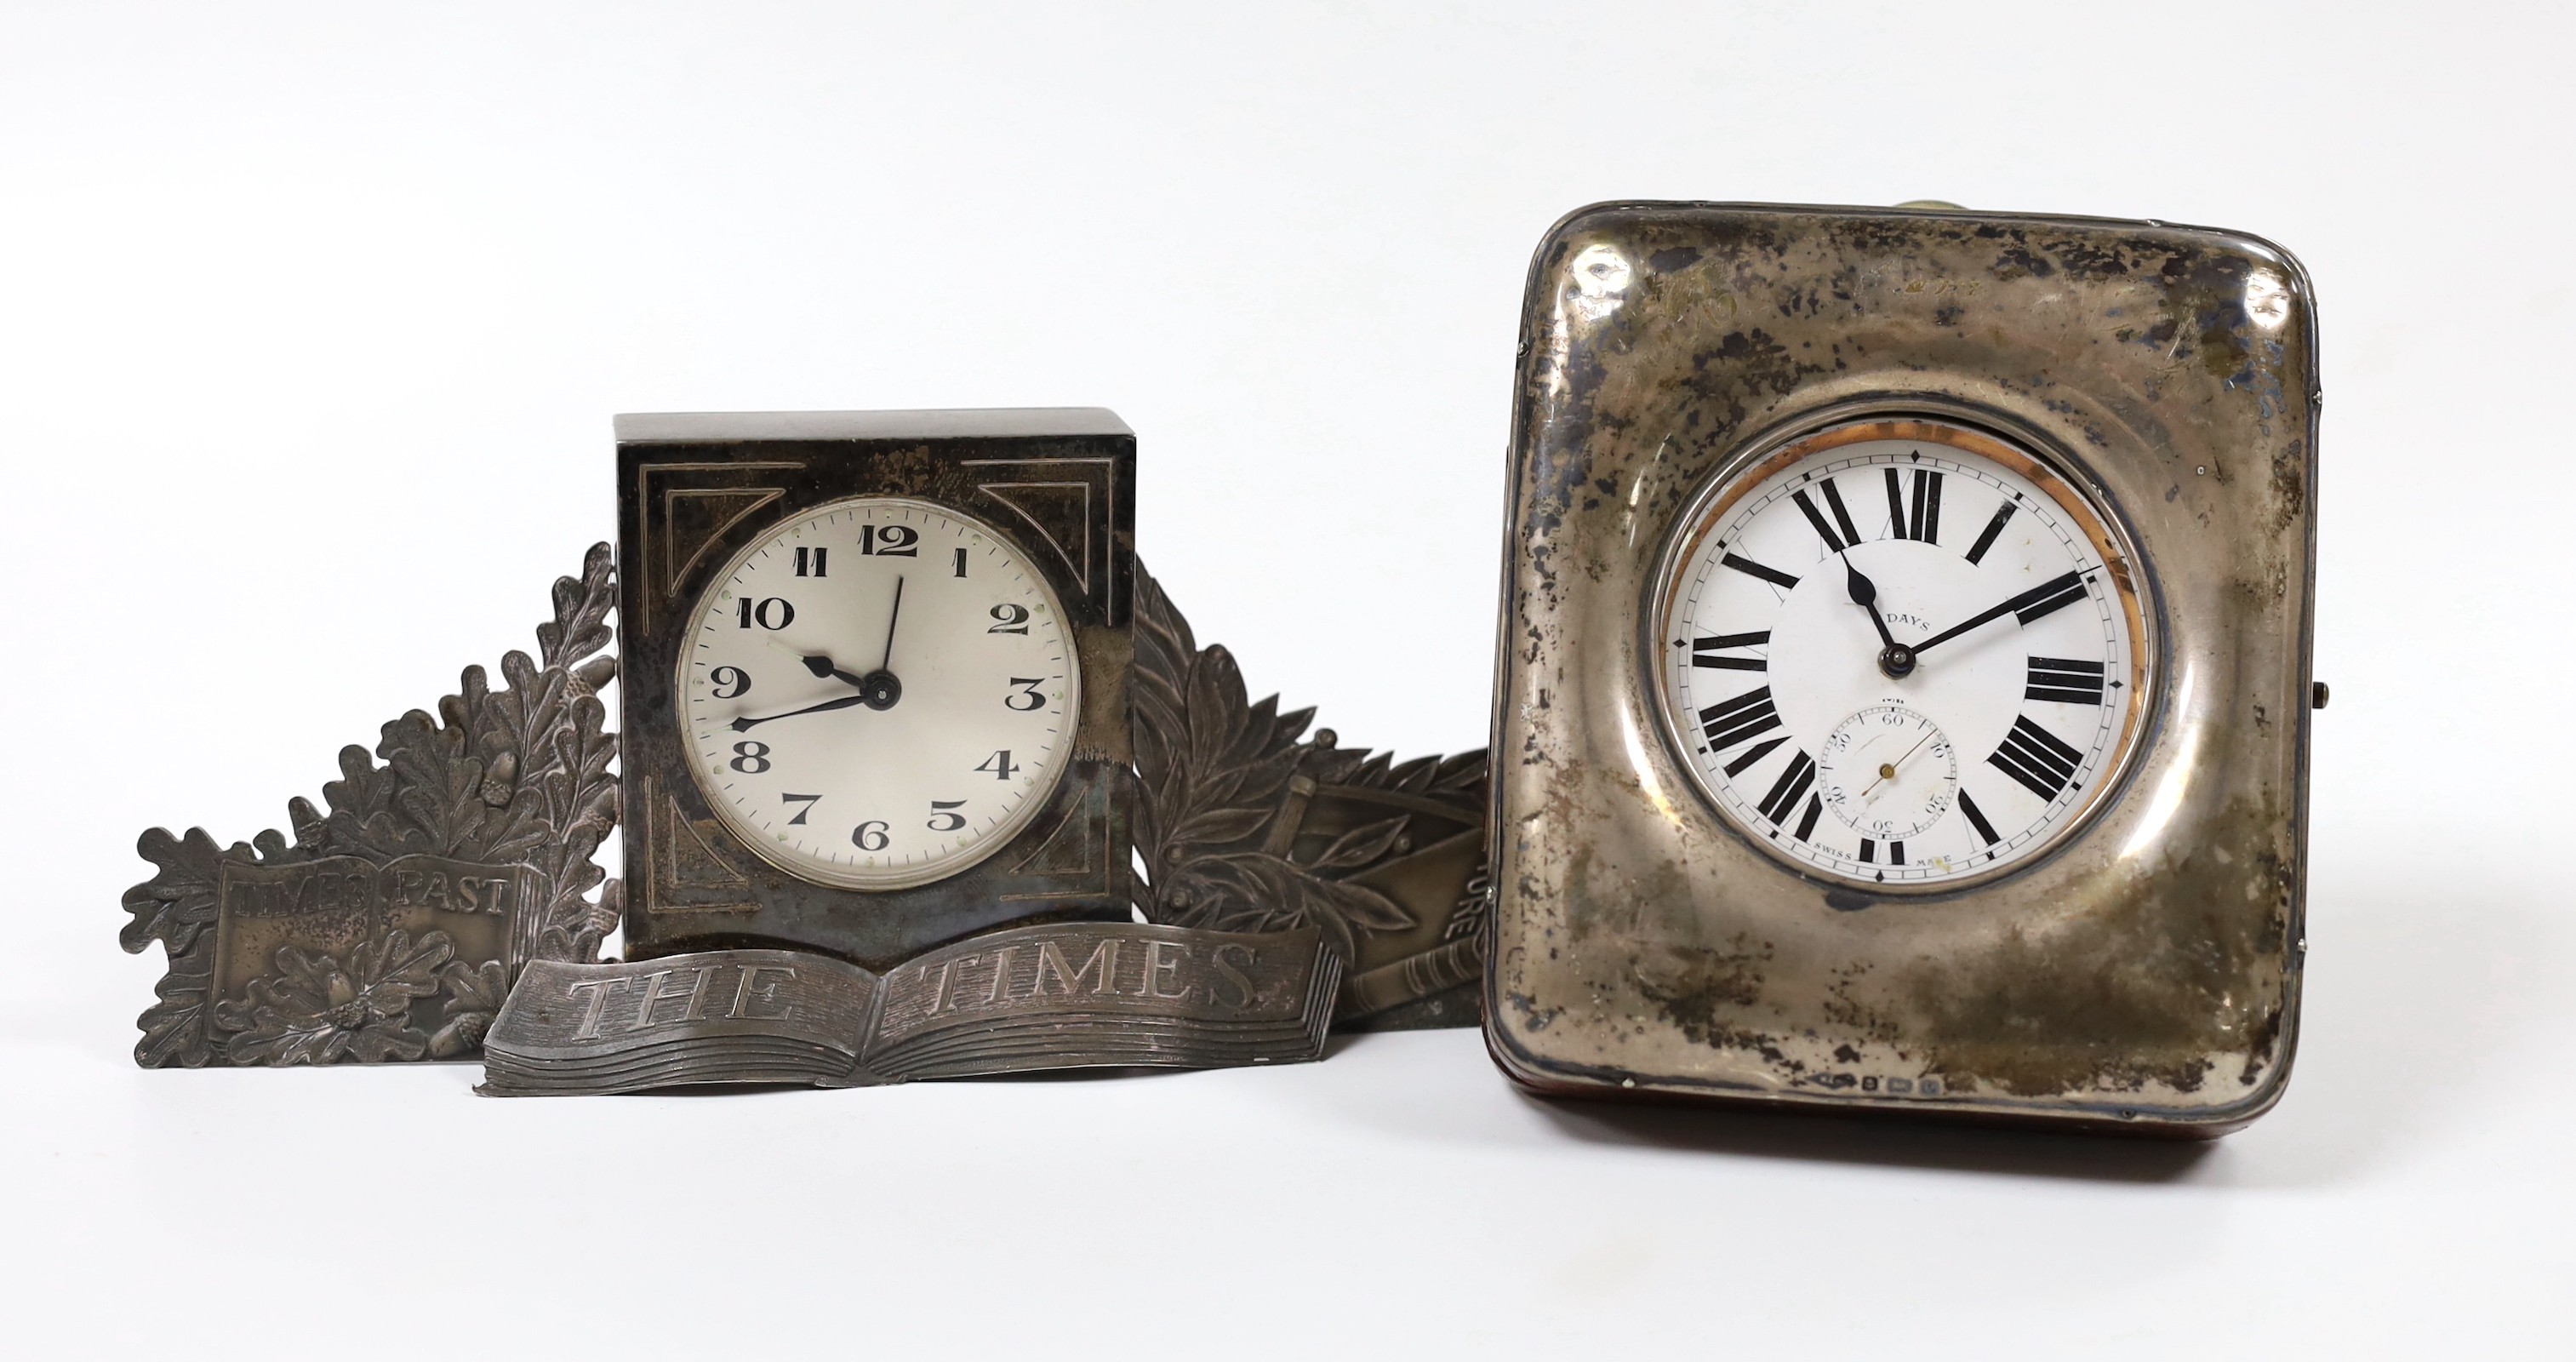 An Edwardian silver mounted leather travelling watch case, Birmingham, 1904, containing an 8 day nickel cased watch, 11.4cm, together with a modern silver mounted 'The Times' mantel timepiece by Fattorini and Sons.